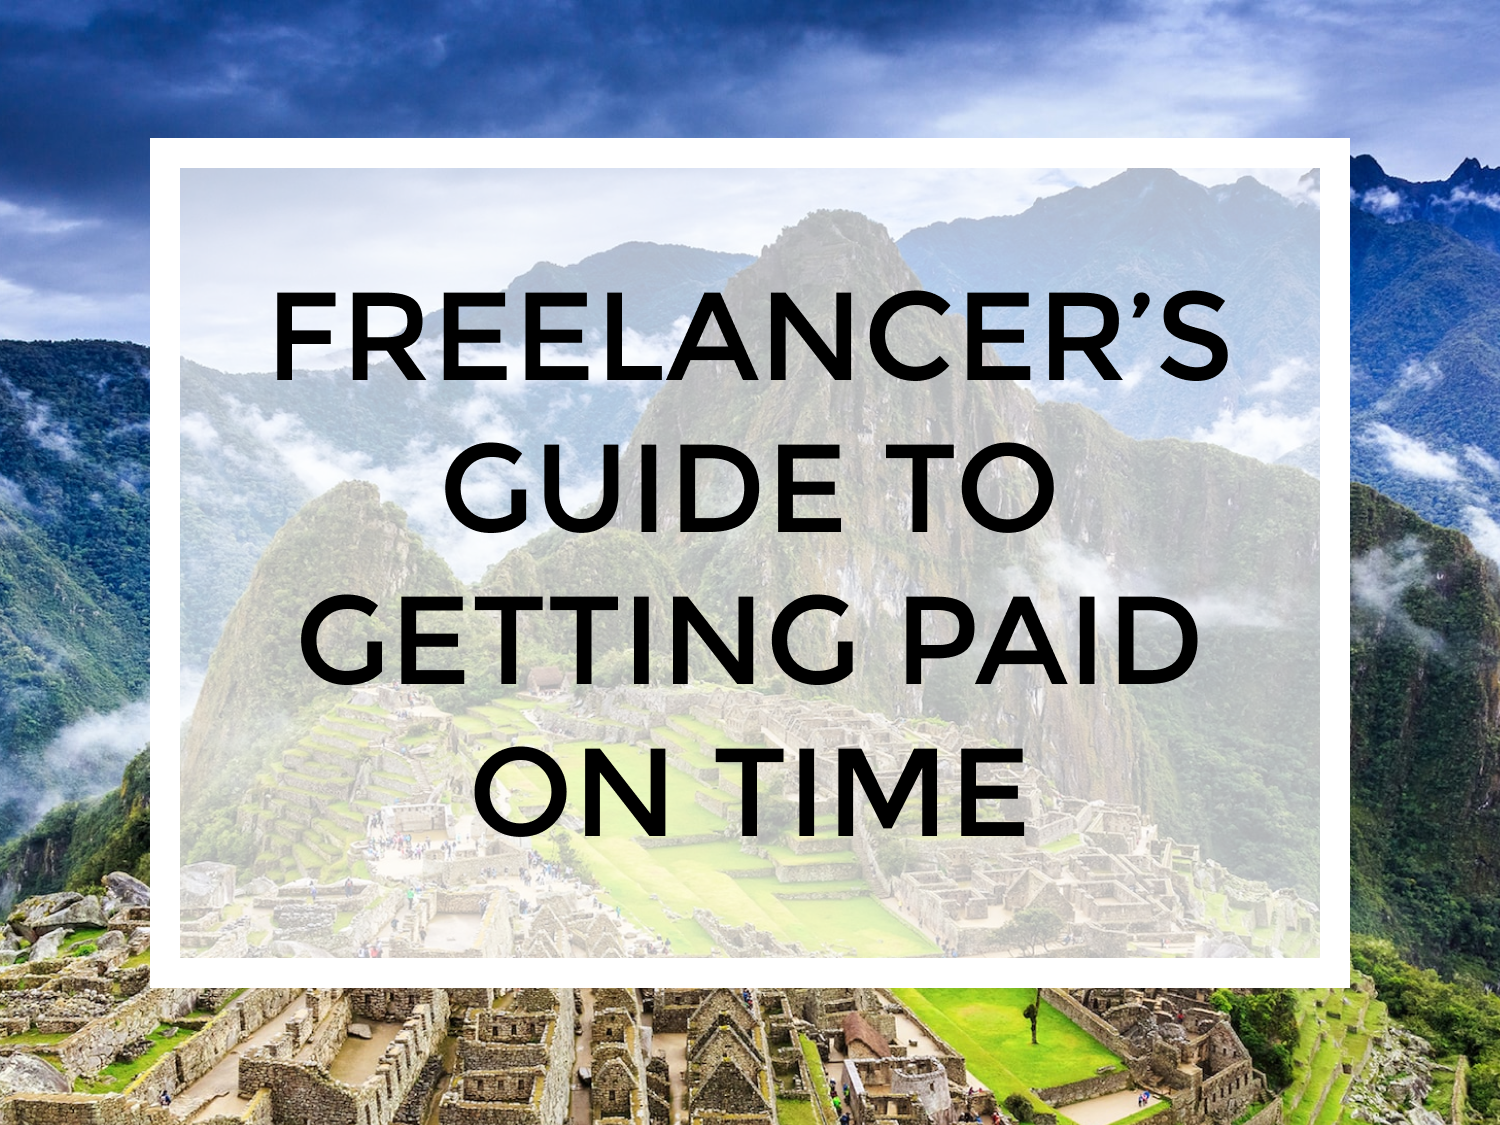 Tips for Getting Paid on Time as a Freelancer